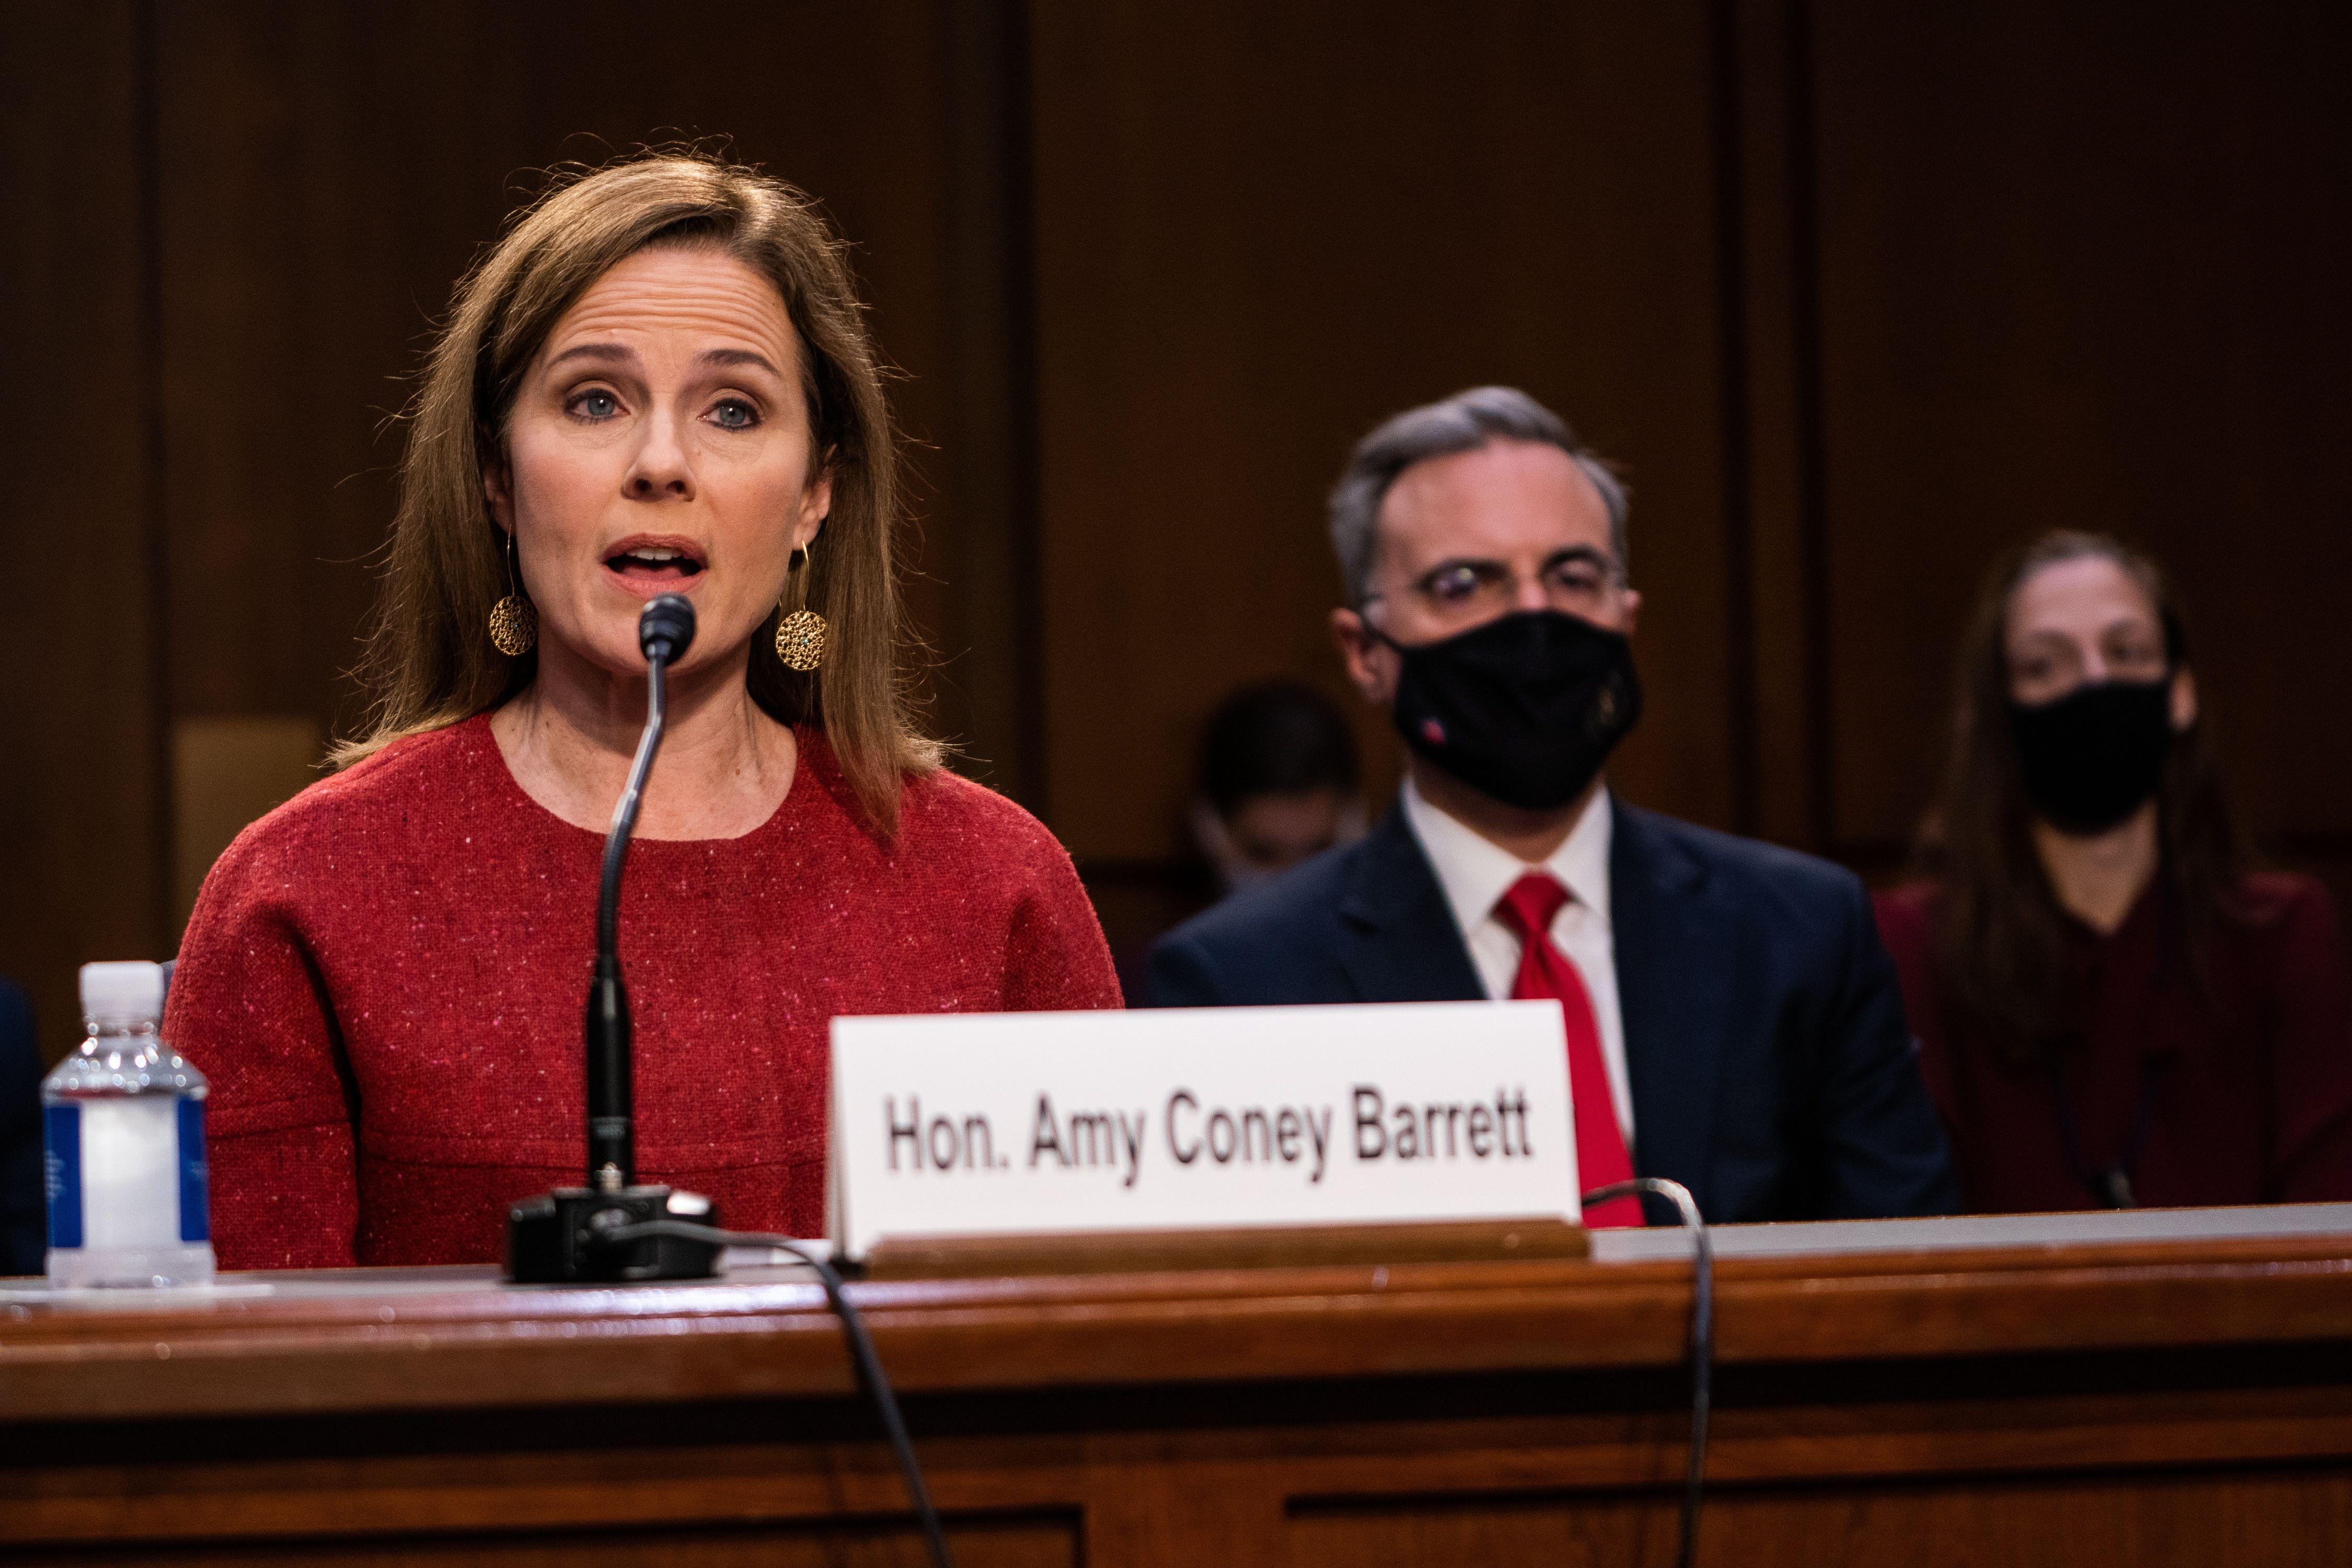 A woman in a red sweater speaking into a microphone sits behind a nameplate that says, "Hon. Amy Coney Barrett."